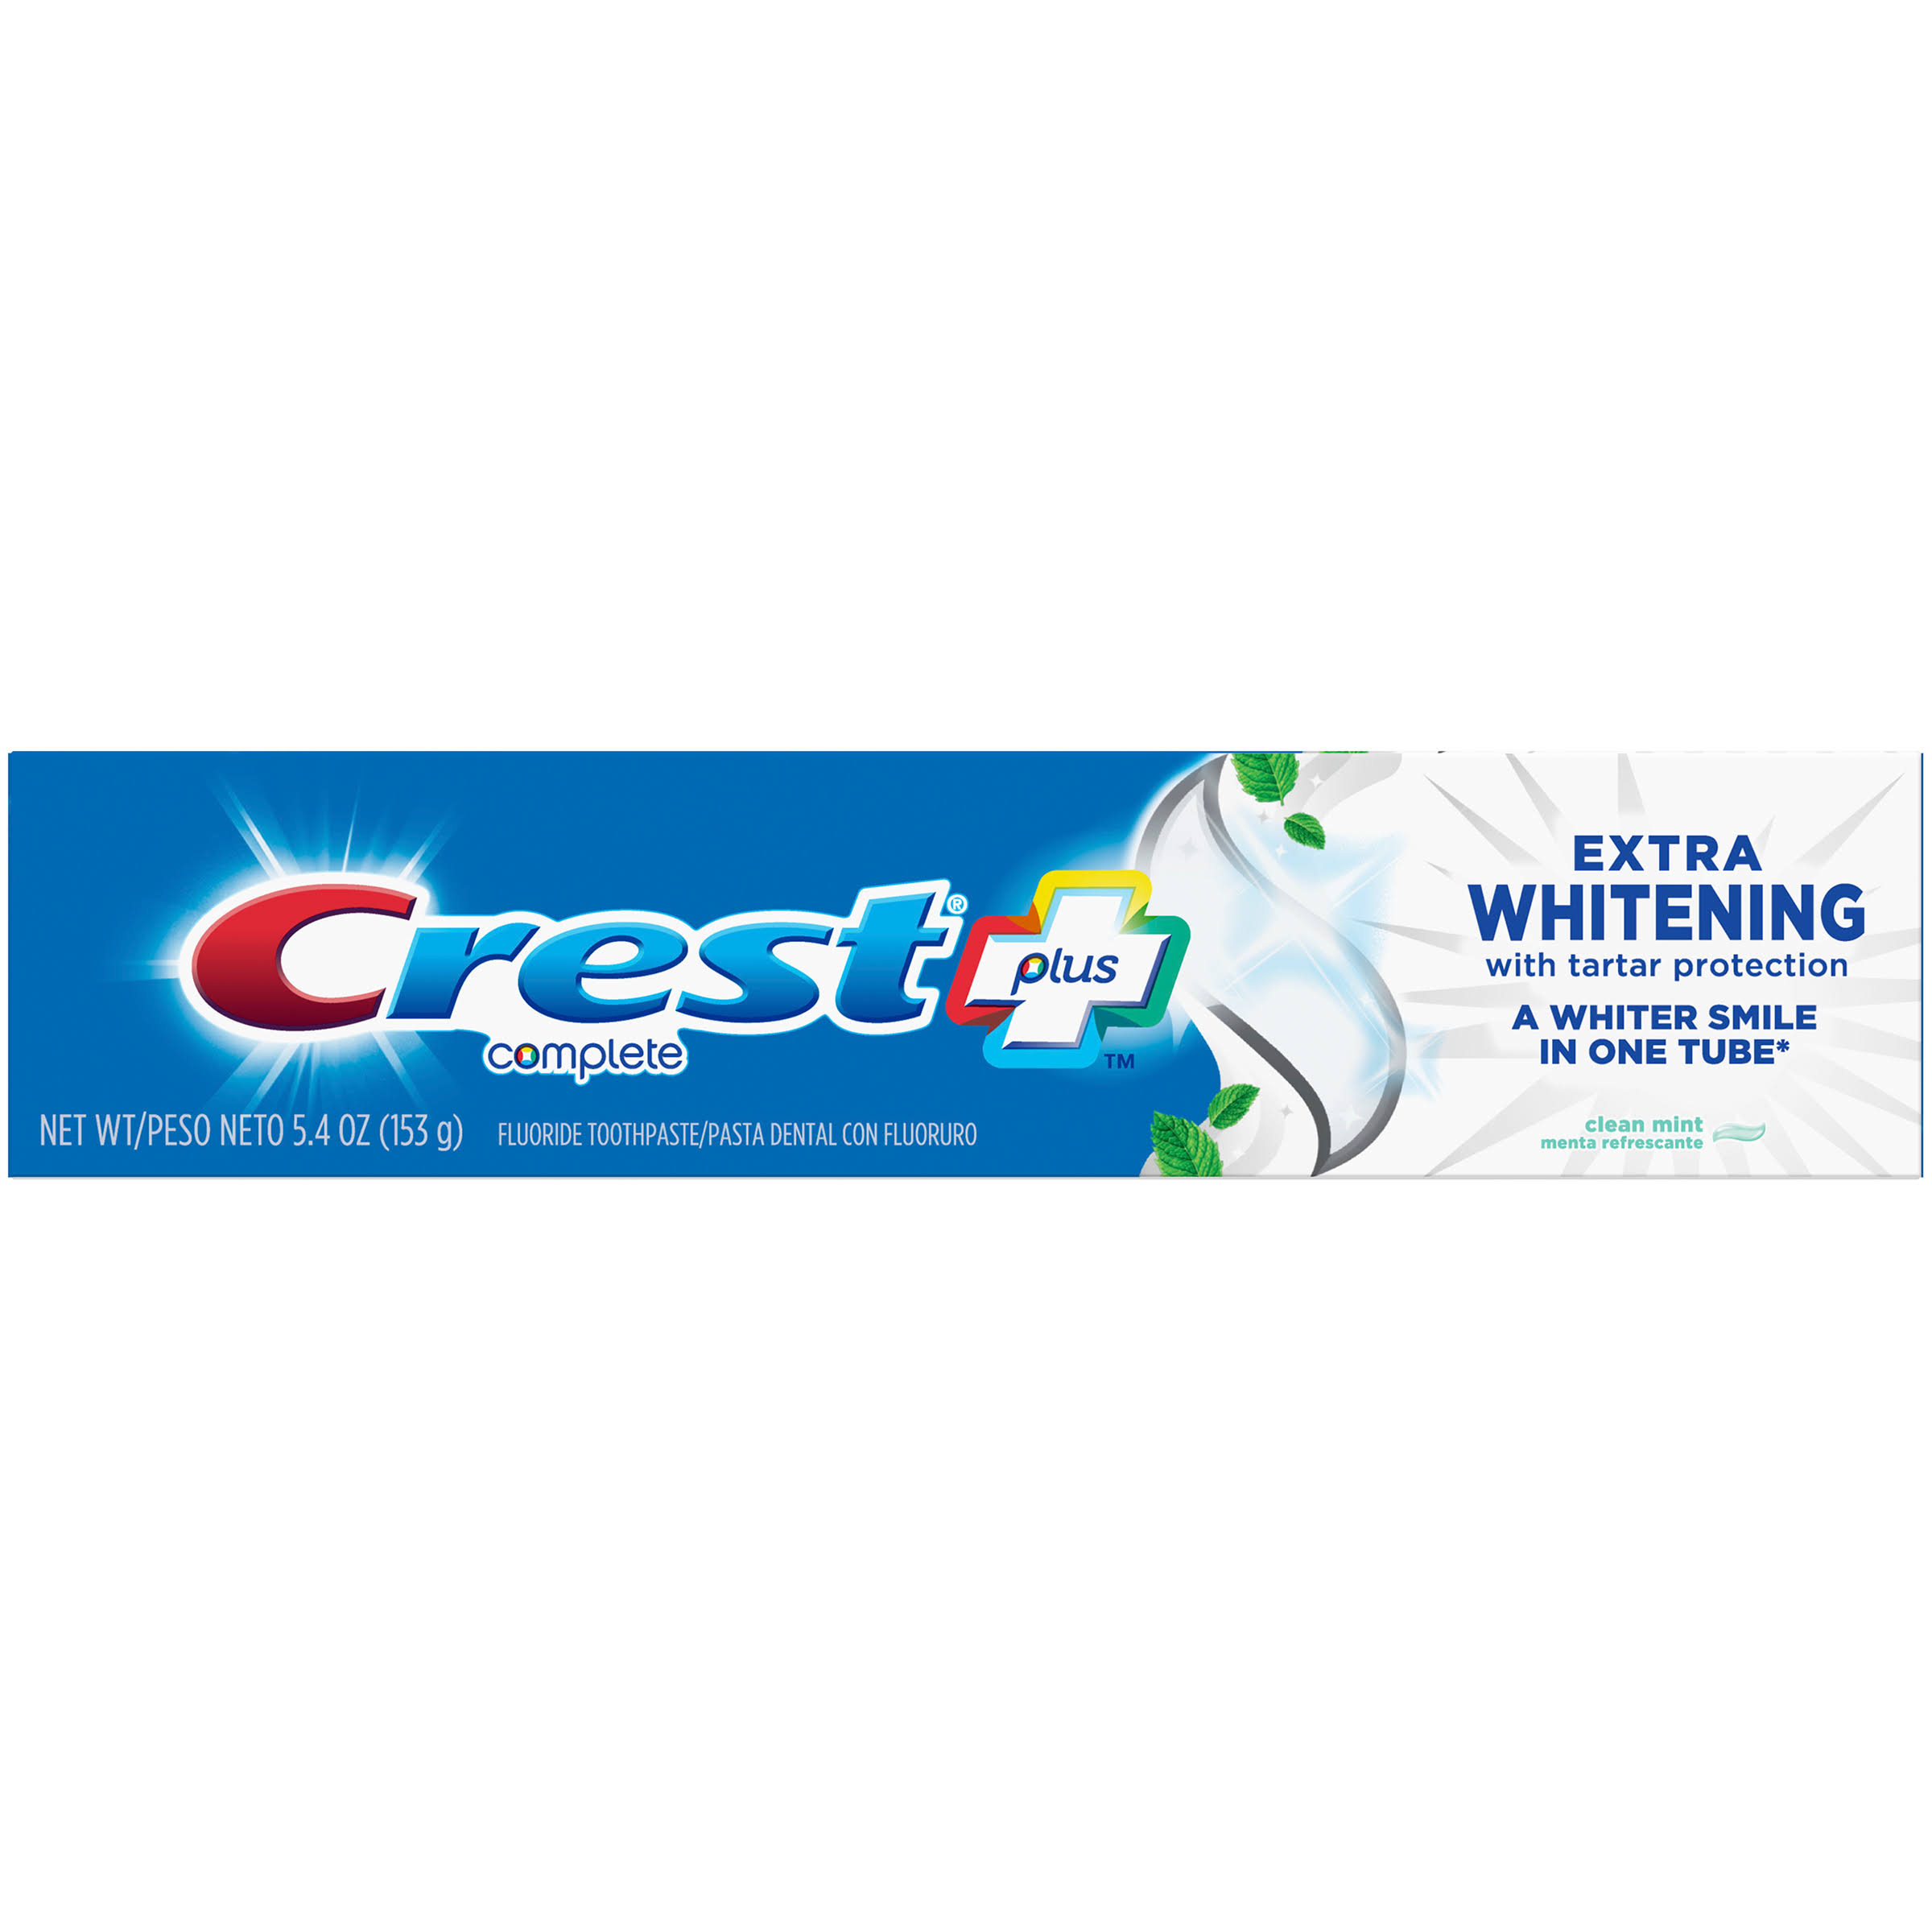 Crest Complete Plus Toothpaste, Fluoride, Clean Mint, Extra Whitening - 5.4 oz